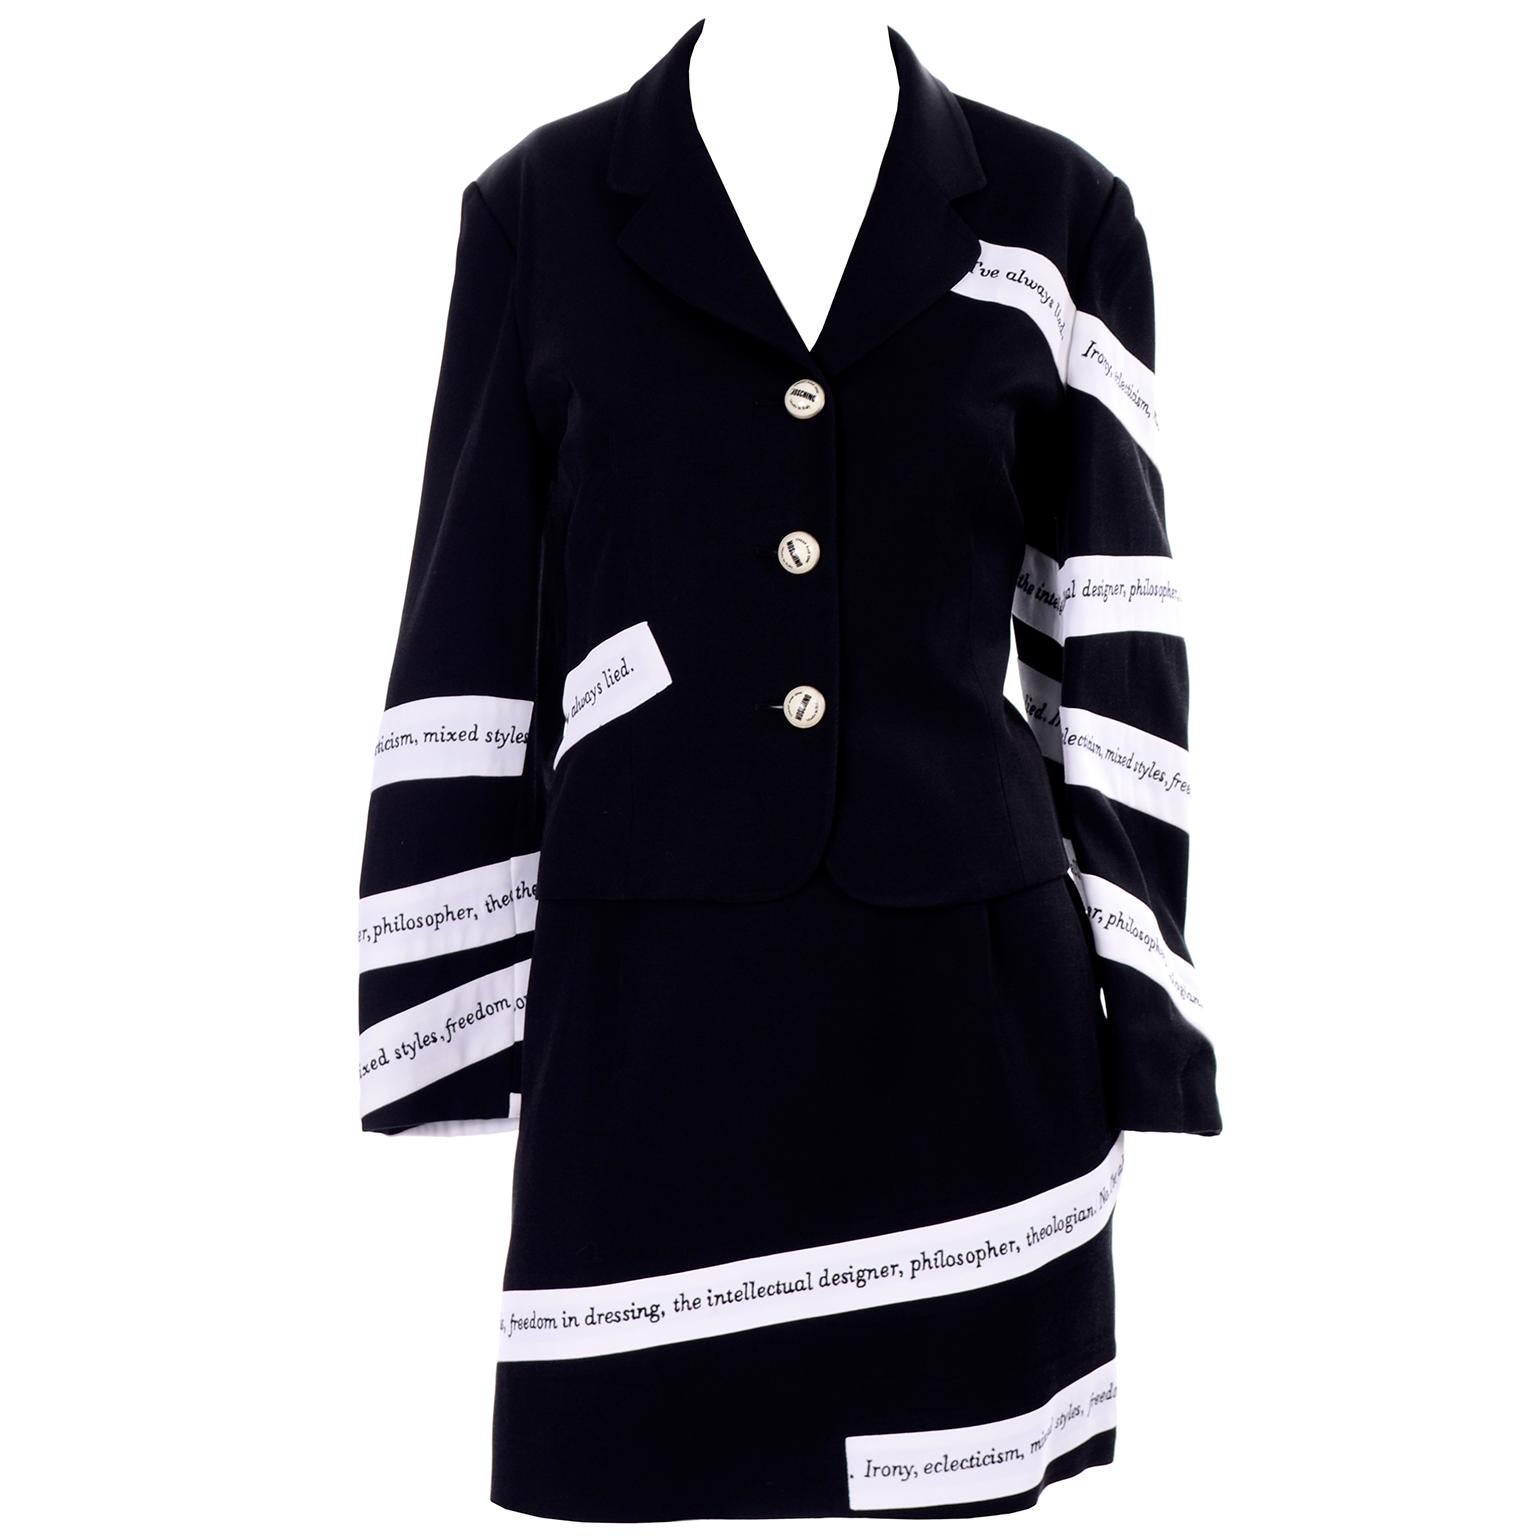 This is a vintage early 1990's Moschino two piece black rayon mini skirt & blazer suit with white ribbon banners embroidered with sayings and words in black: Irony, eclecticism, mixed styles, freedom in dressing, the intellectual designer,